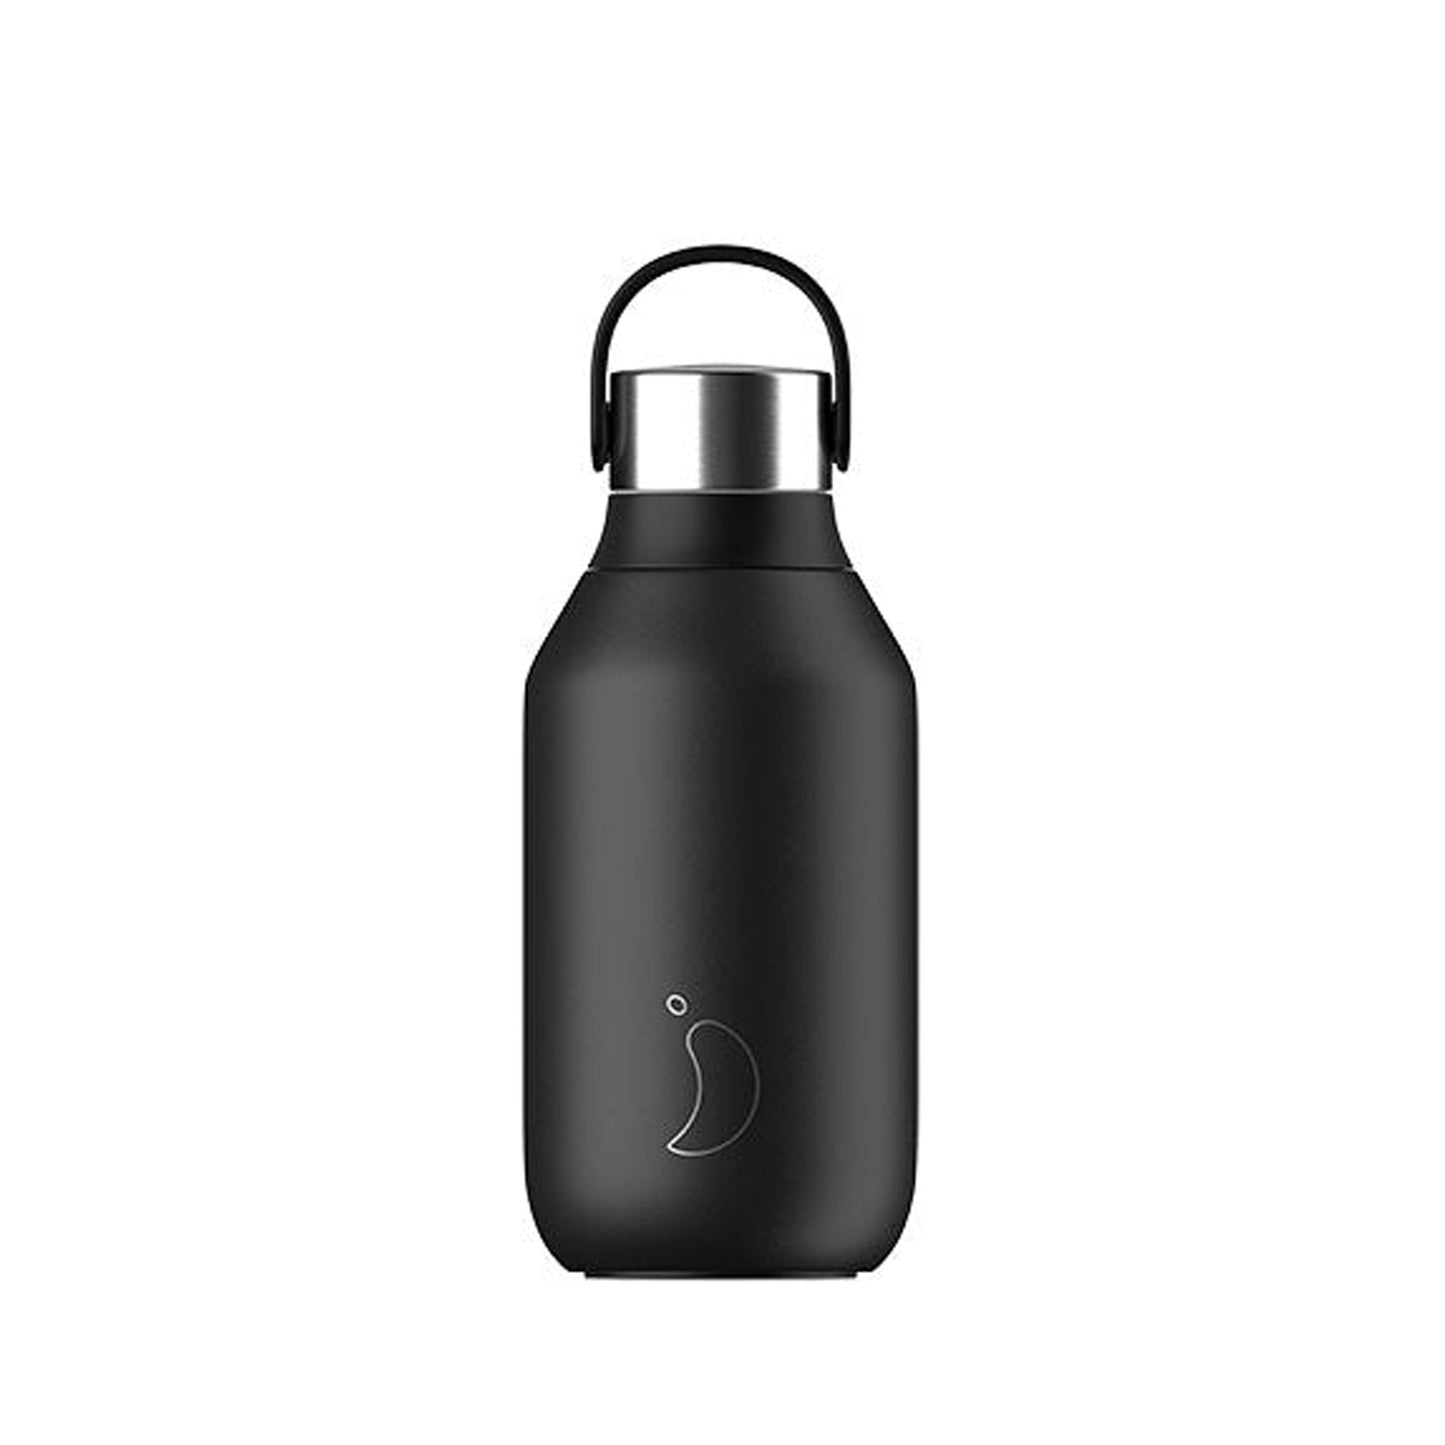 chillys bottle series 2. 350ml size in abyss black